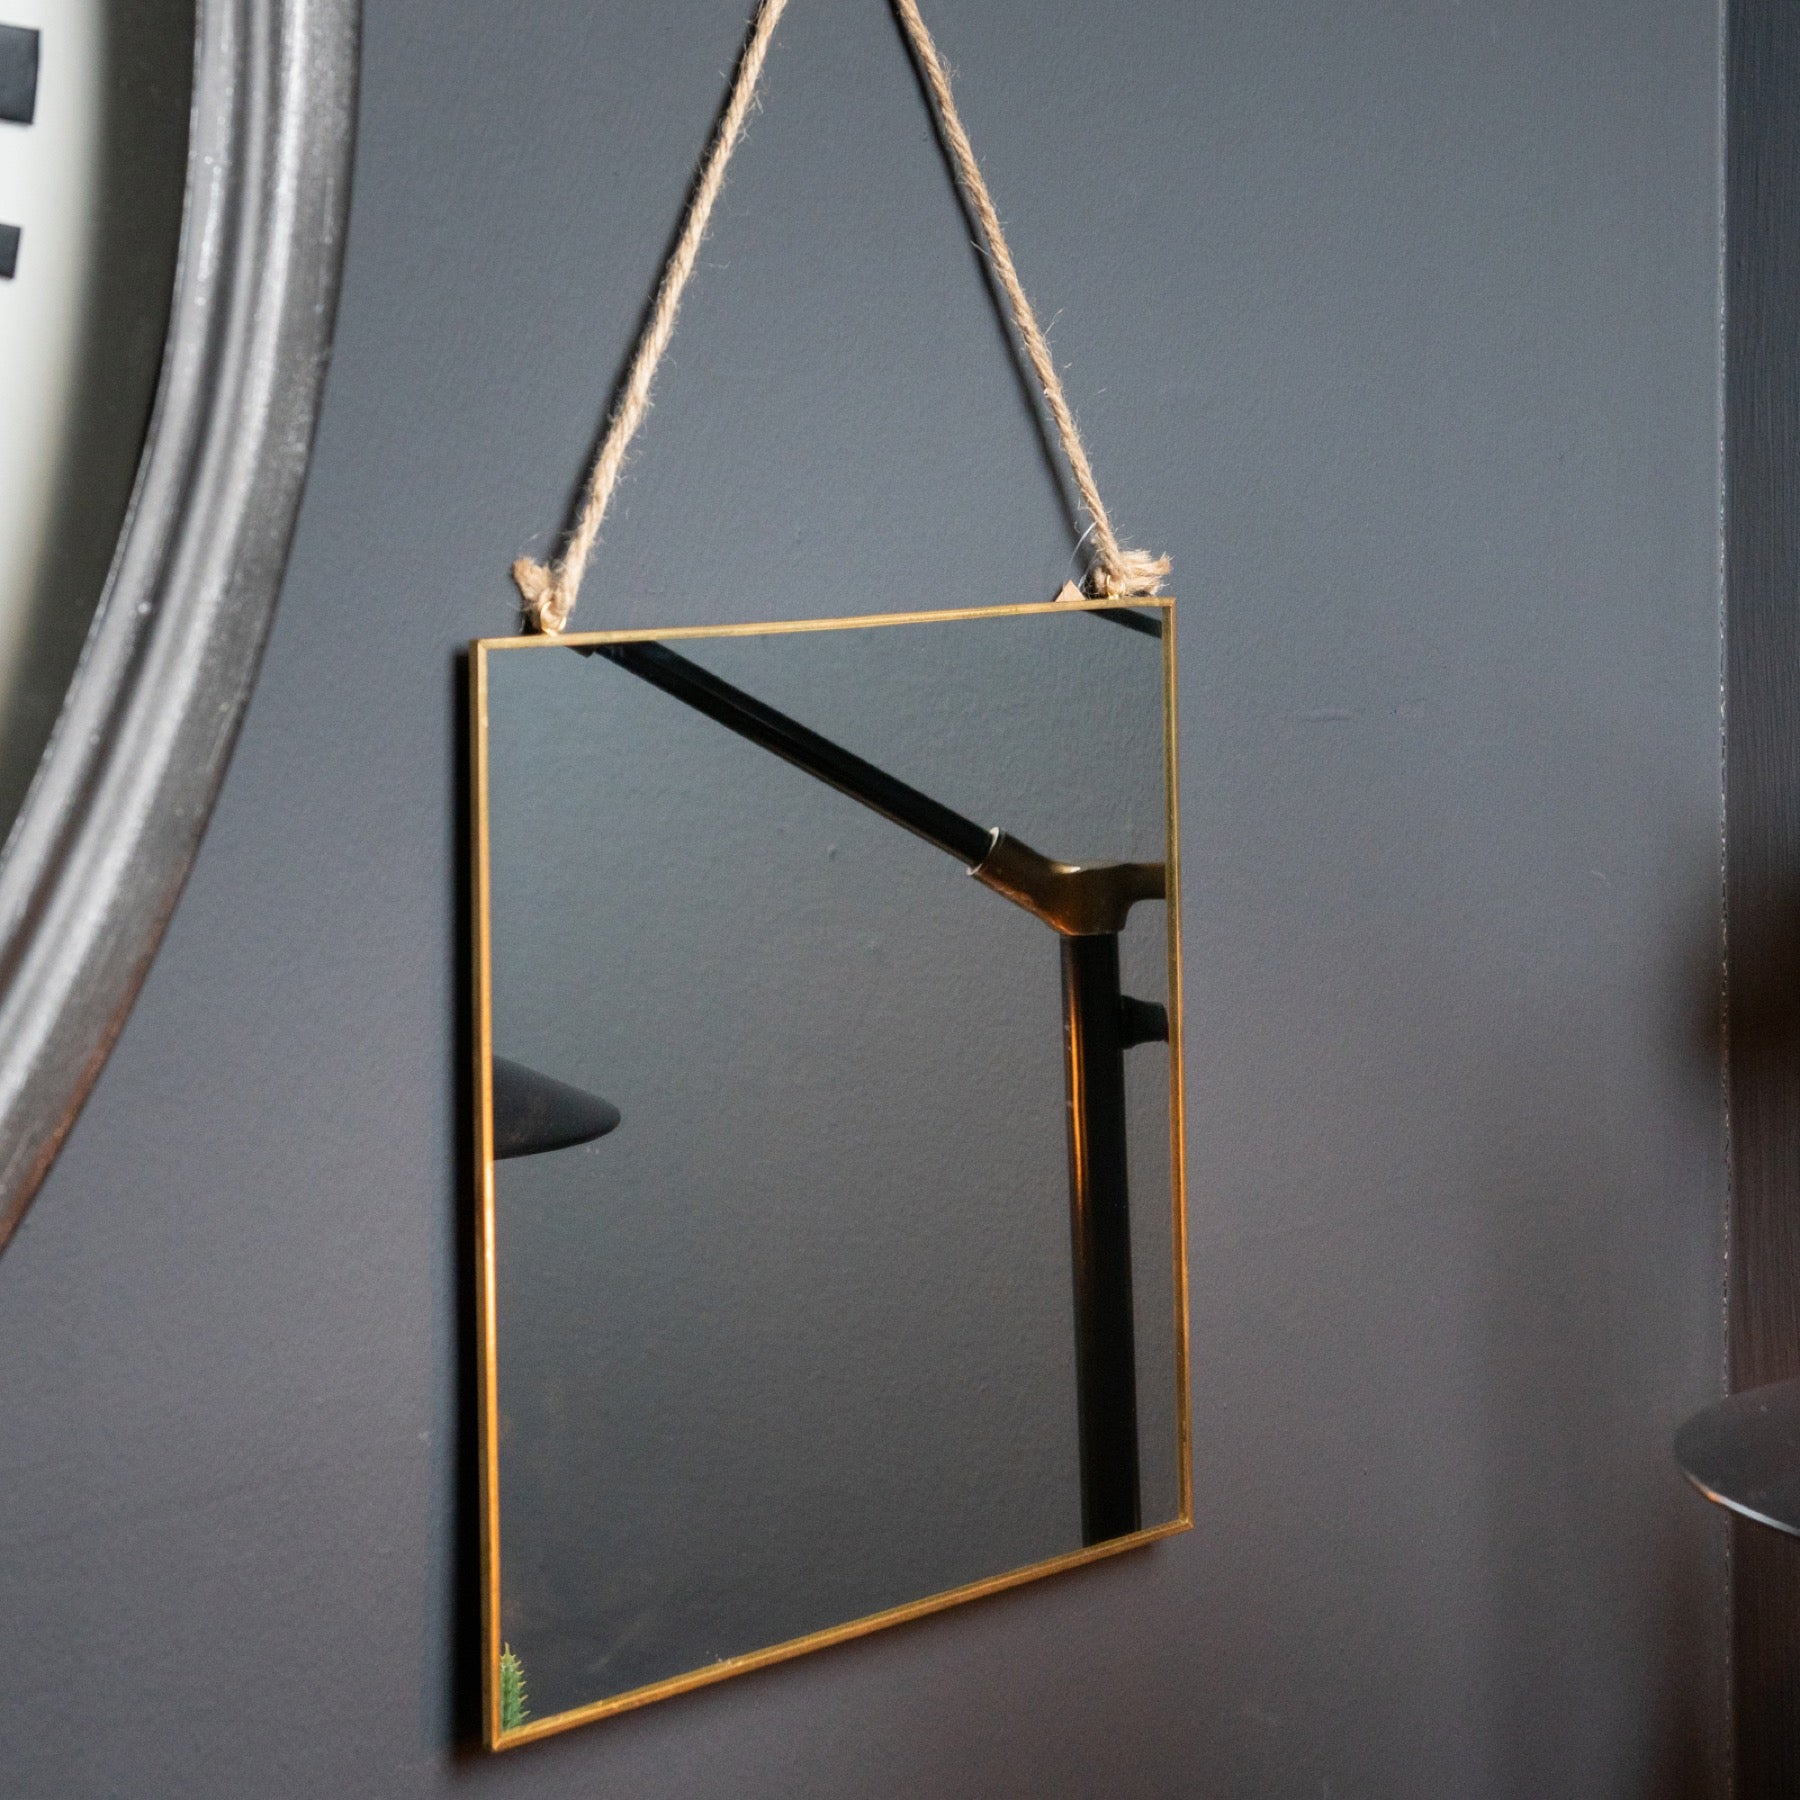 Hill Interiors Gold Edged Square Hanging Wall Mirror